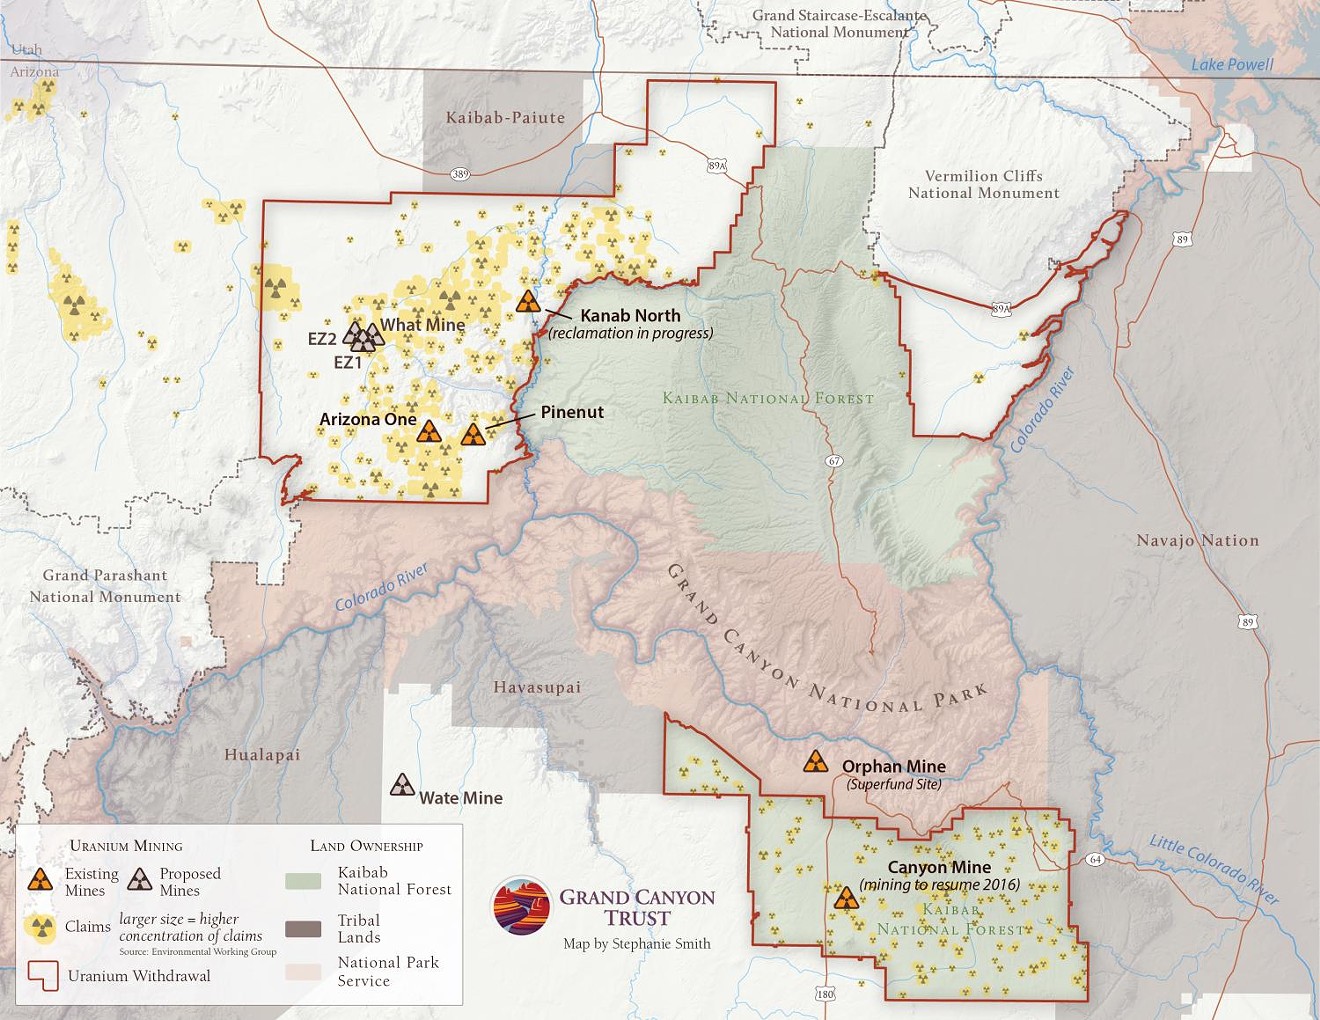 Areas covered by the Obama administration's moratorium on uranium mining are lined in red.